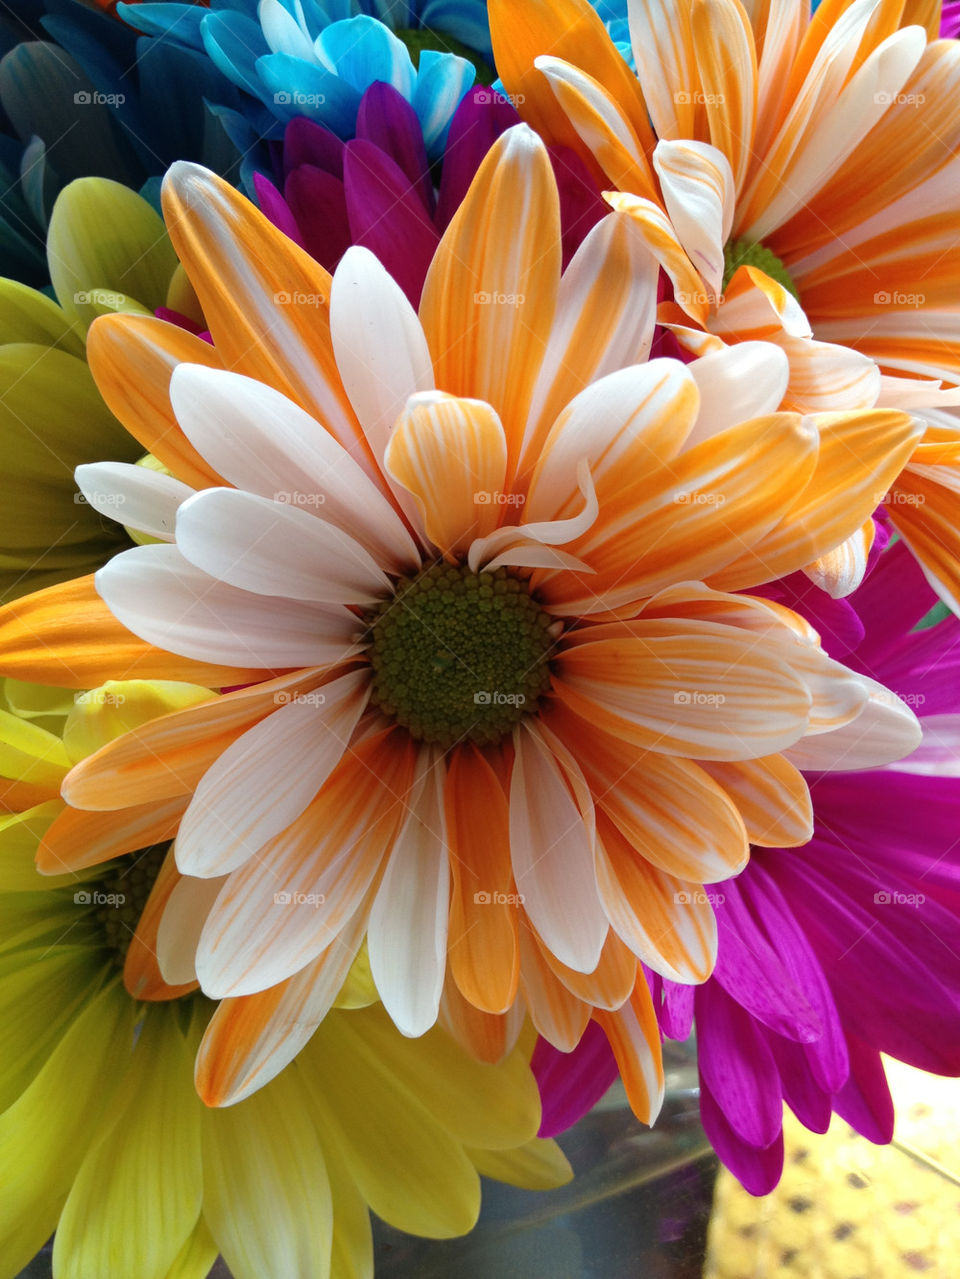 flowers orange floral daisies by dalenzia